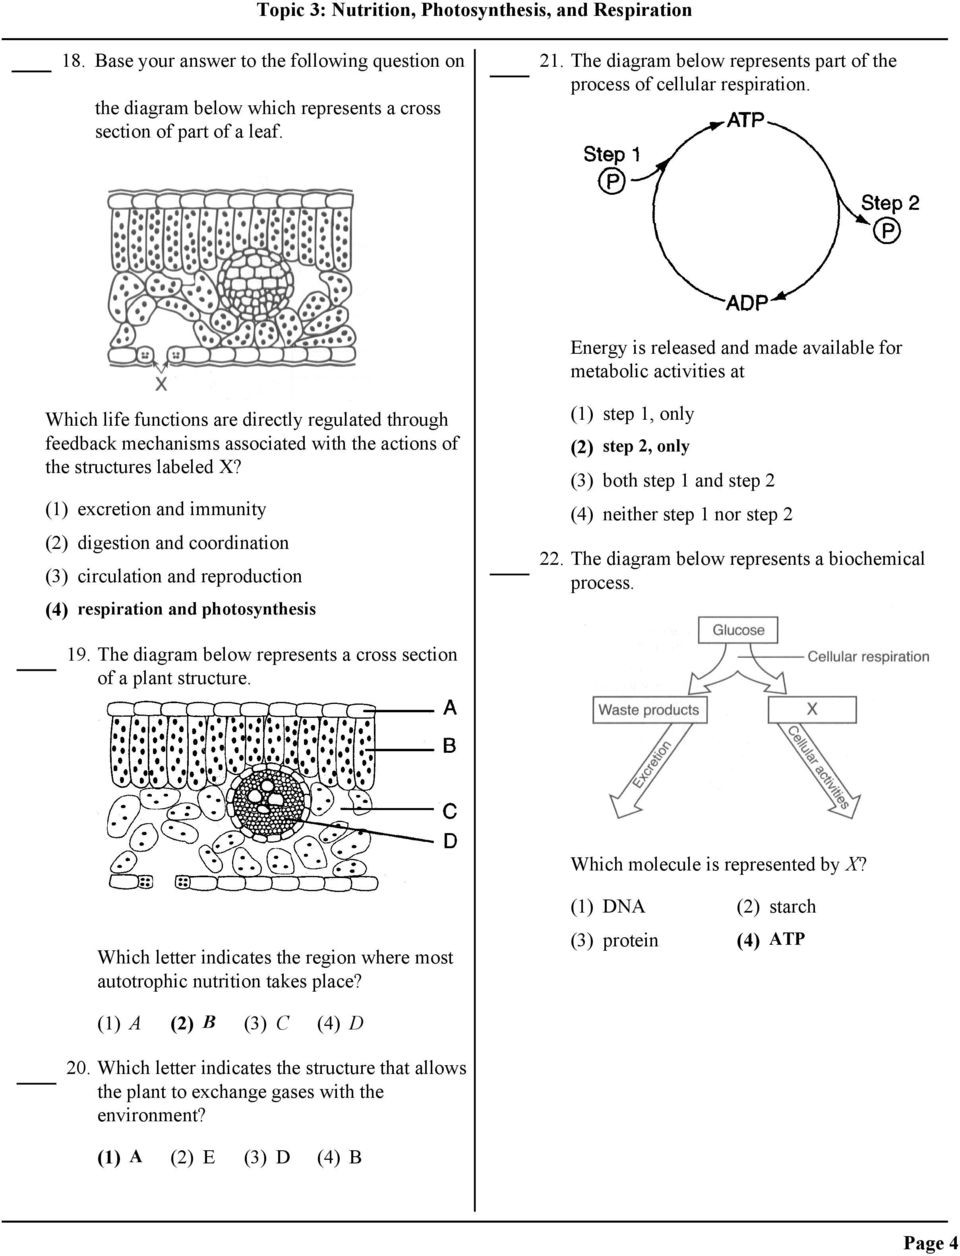 Photosynthesis Diagrams Worksheet Answers topic 3 Nutrition Synthesis and Respiration Pdf